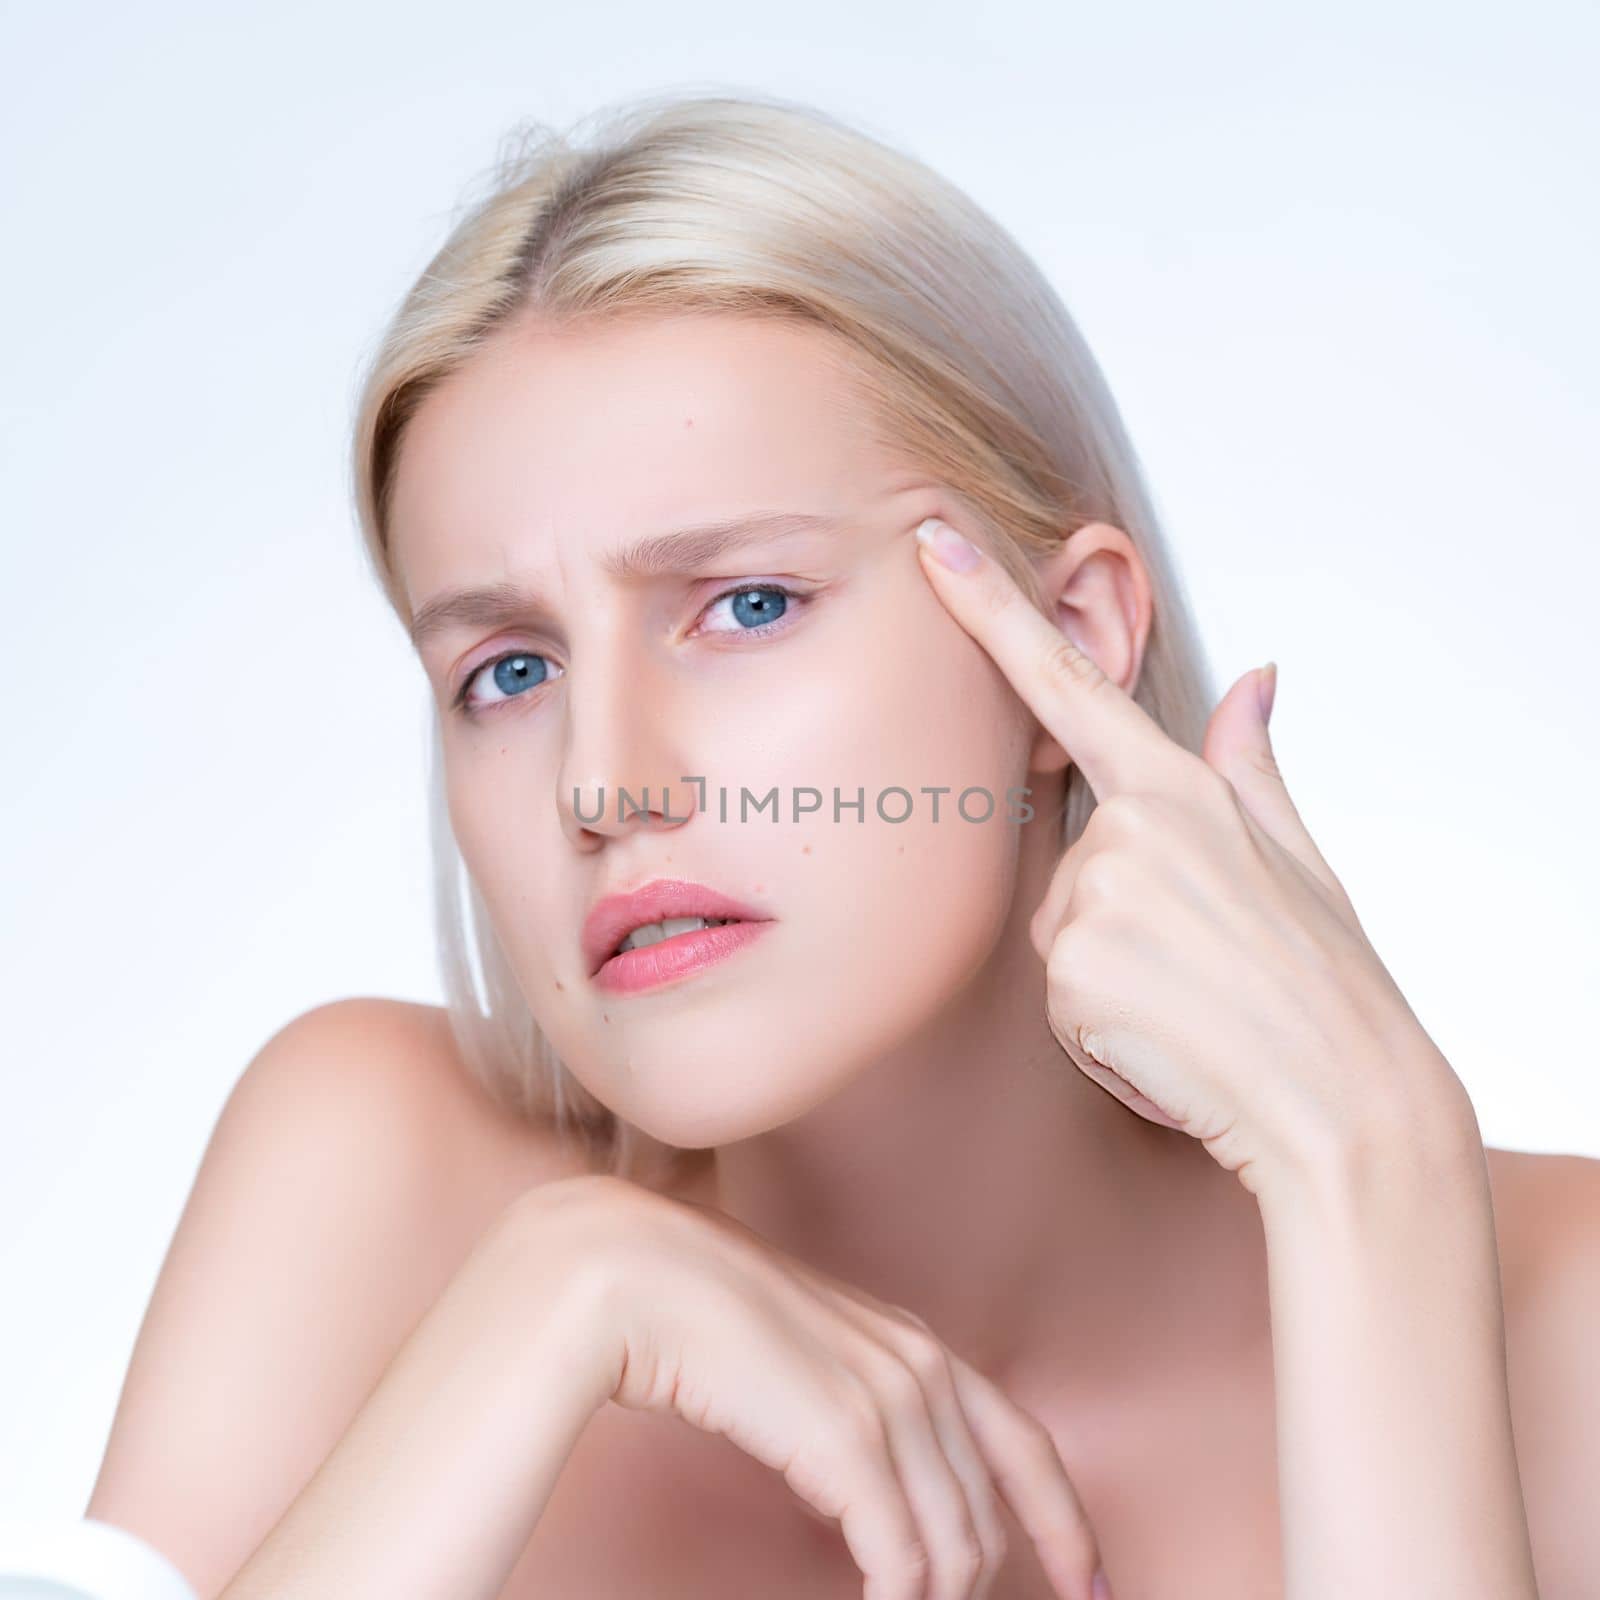 Acne problem troubling closeup personable worried woman with natural beauty skin checking her face squeezing pimple spots in isolated background. Copyspace for blemish skincare treatment problem.